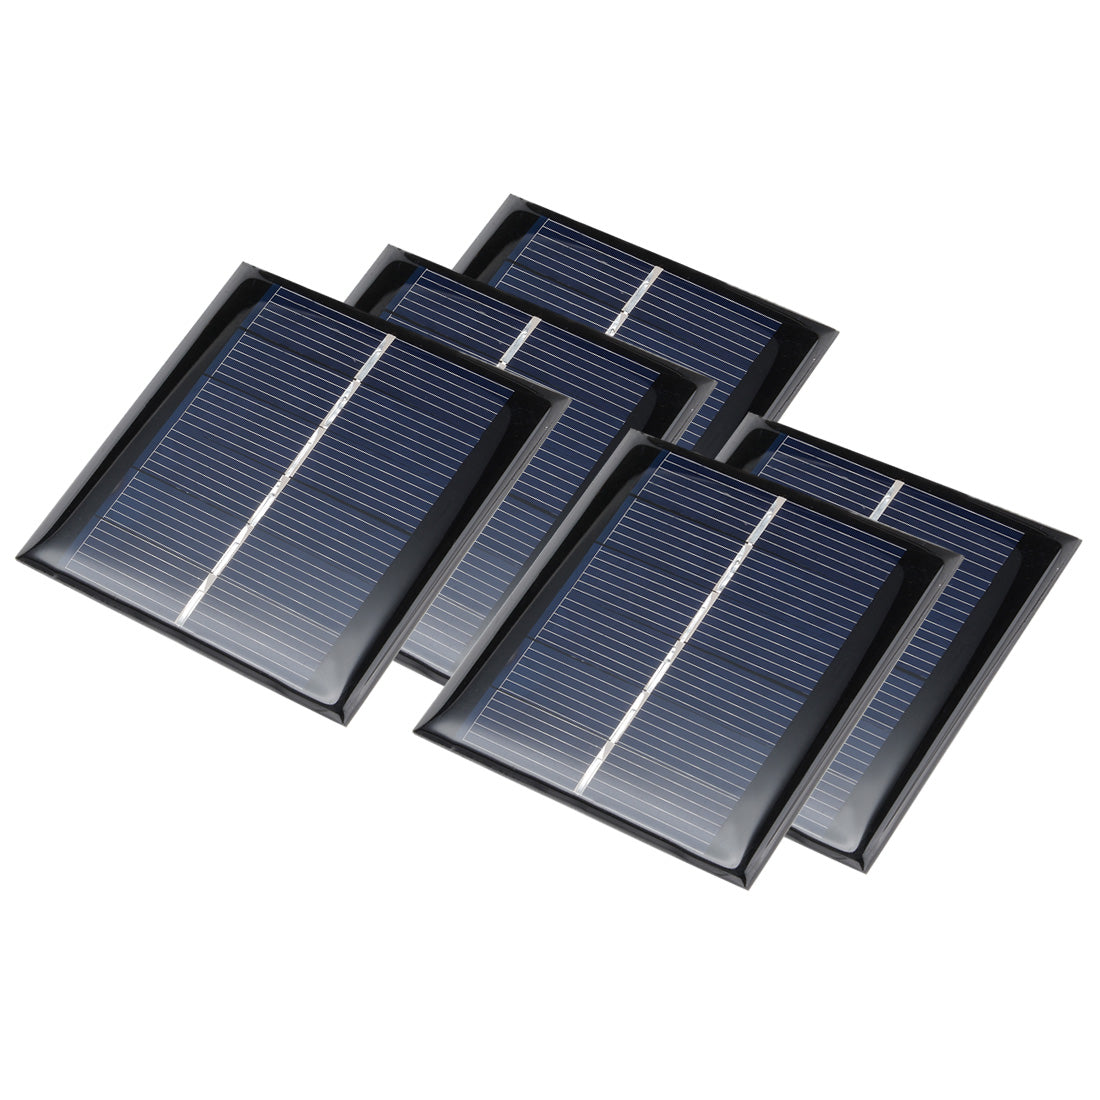 uxcell Uxcell 5Pcs 3V 100mA Poly Mini Solar Cell Panel Module DIY for Phone Light Toys Charger 70mm x 70mm